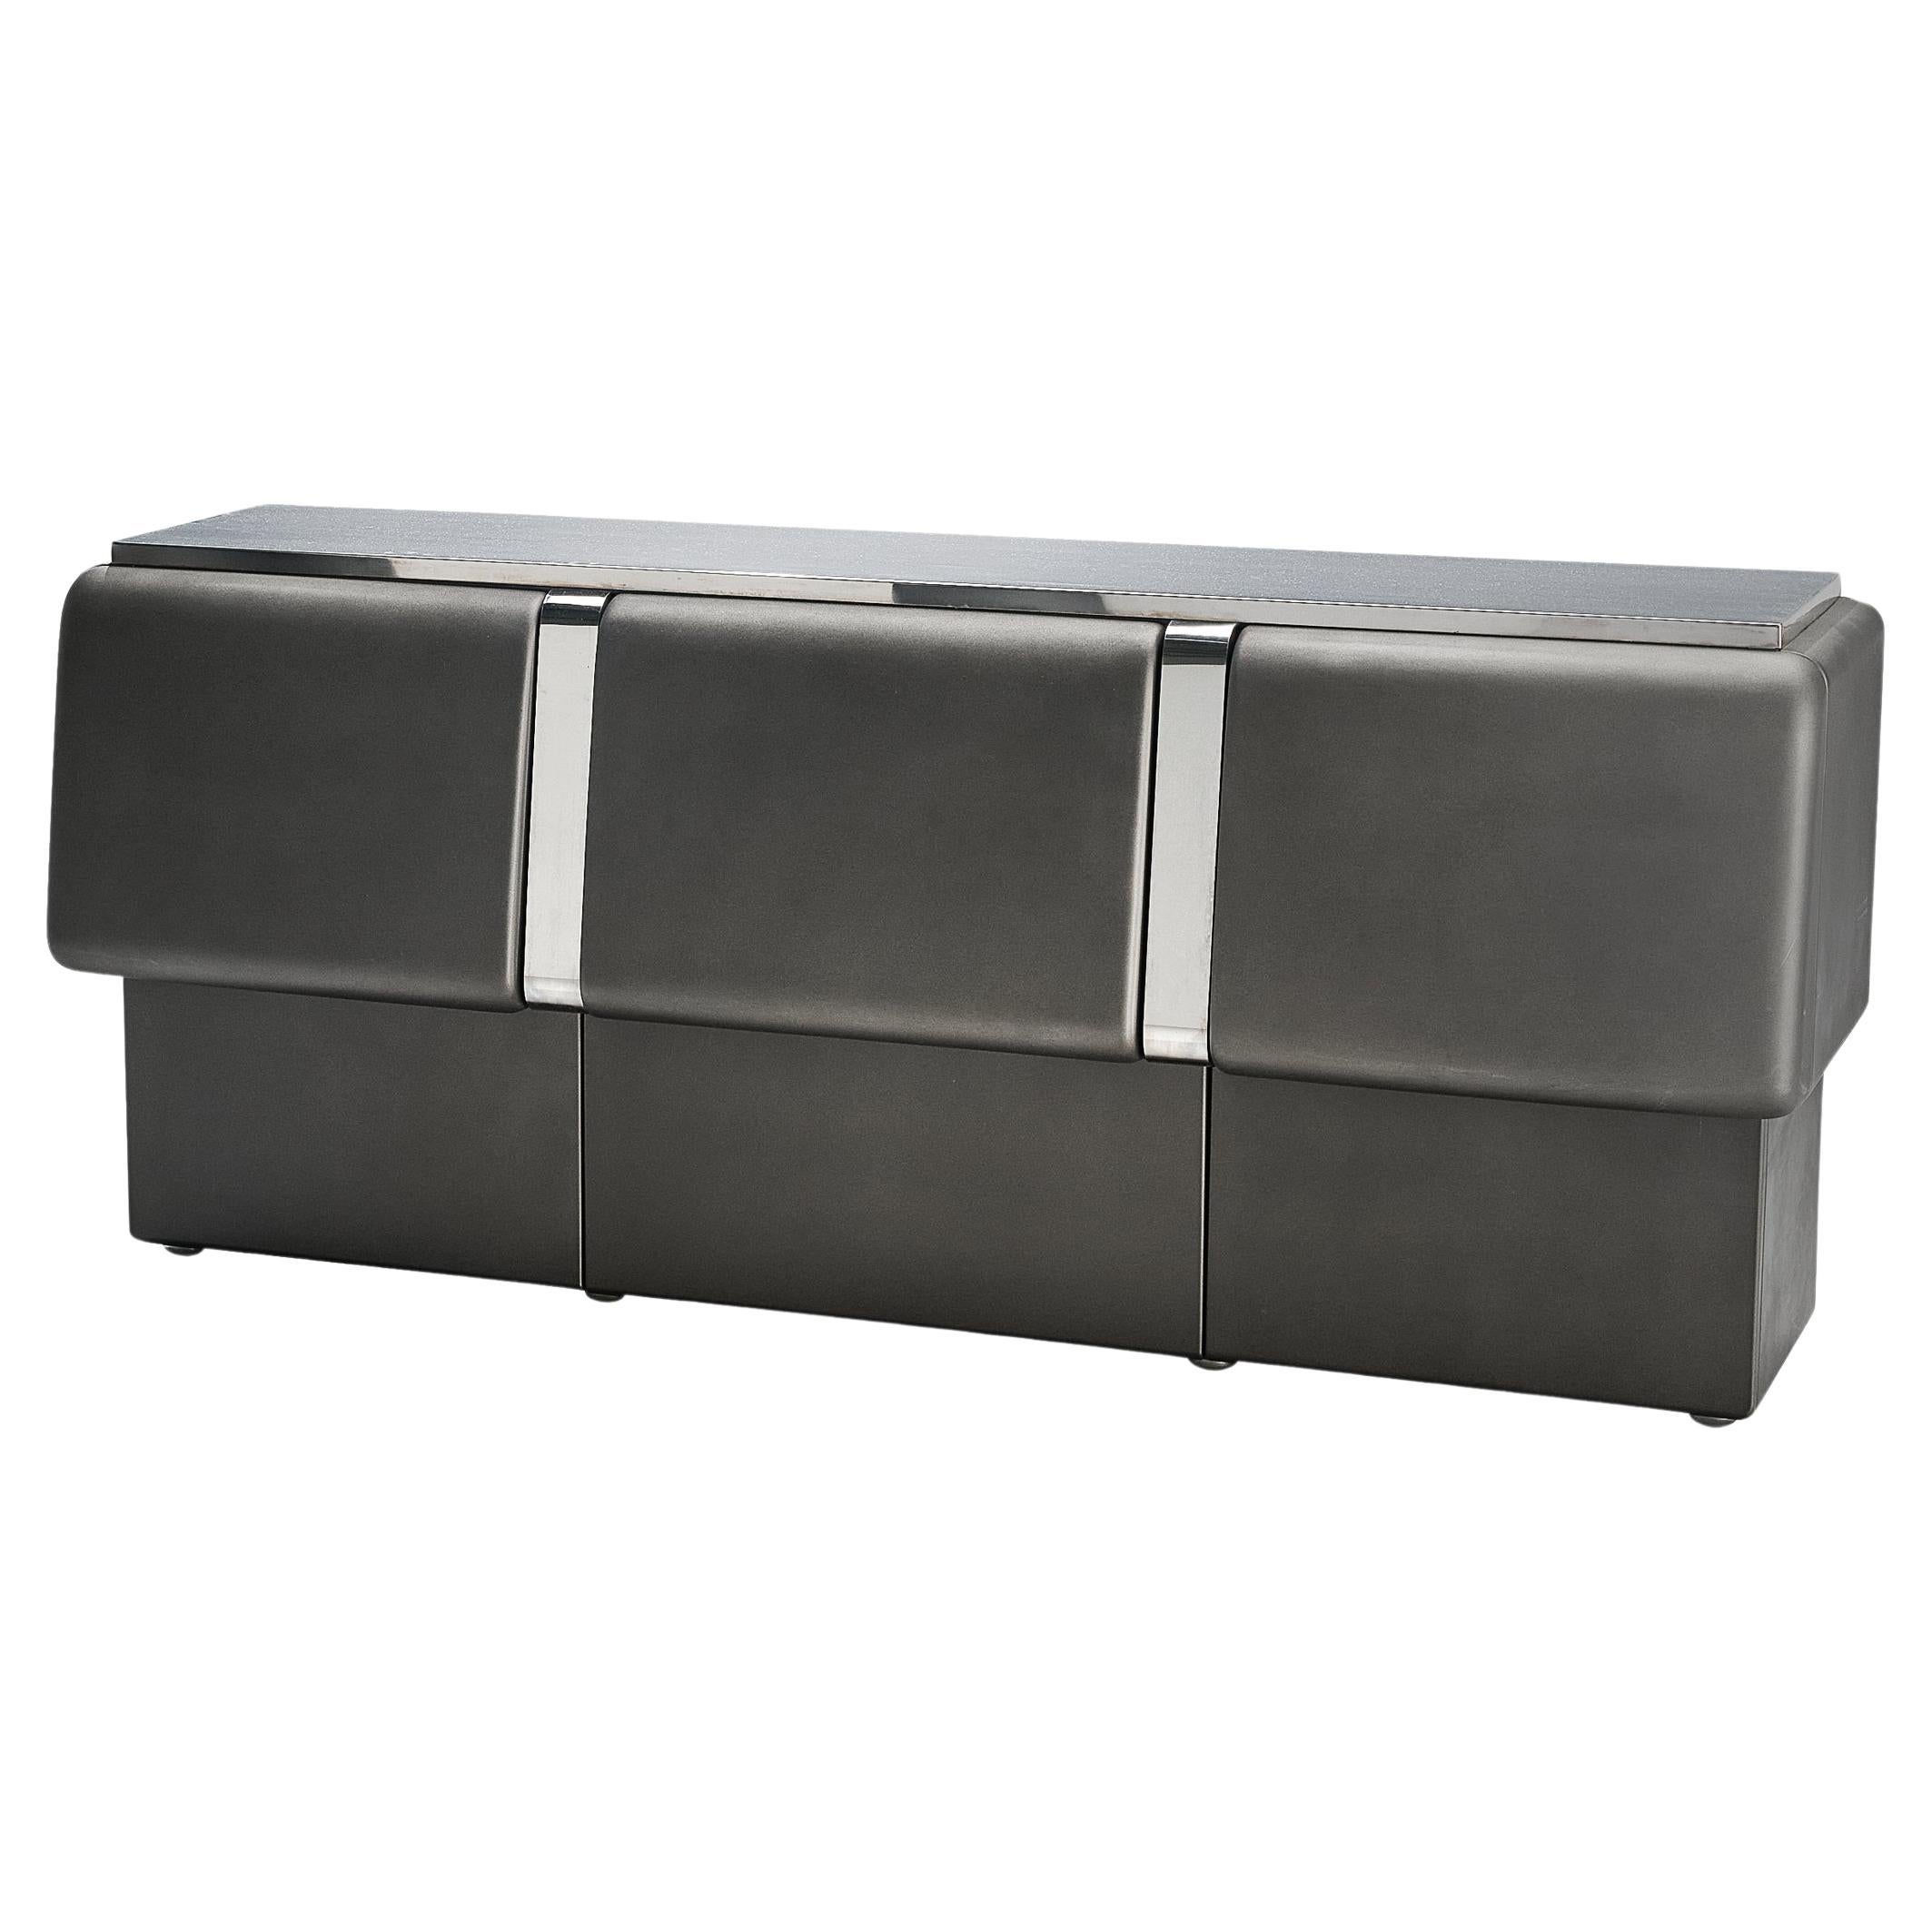 Vittorio Introini 'Colby' Sideboard in Grey Lacquered Wood and Metal  For Sale